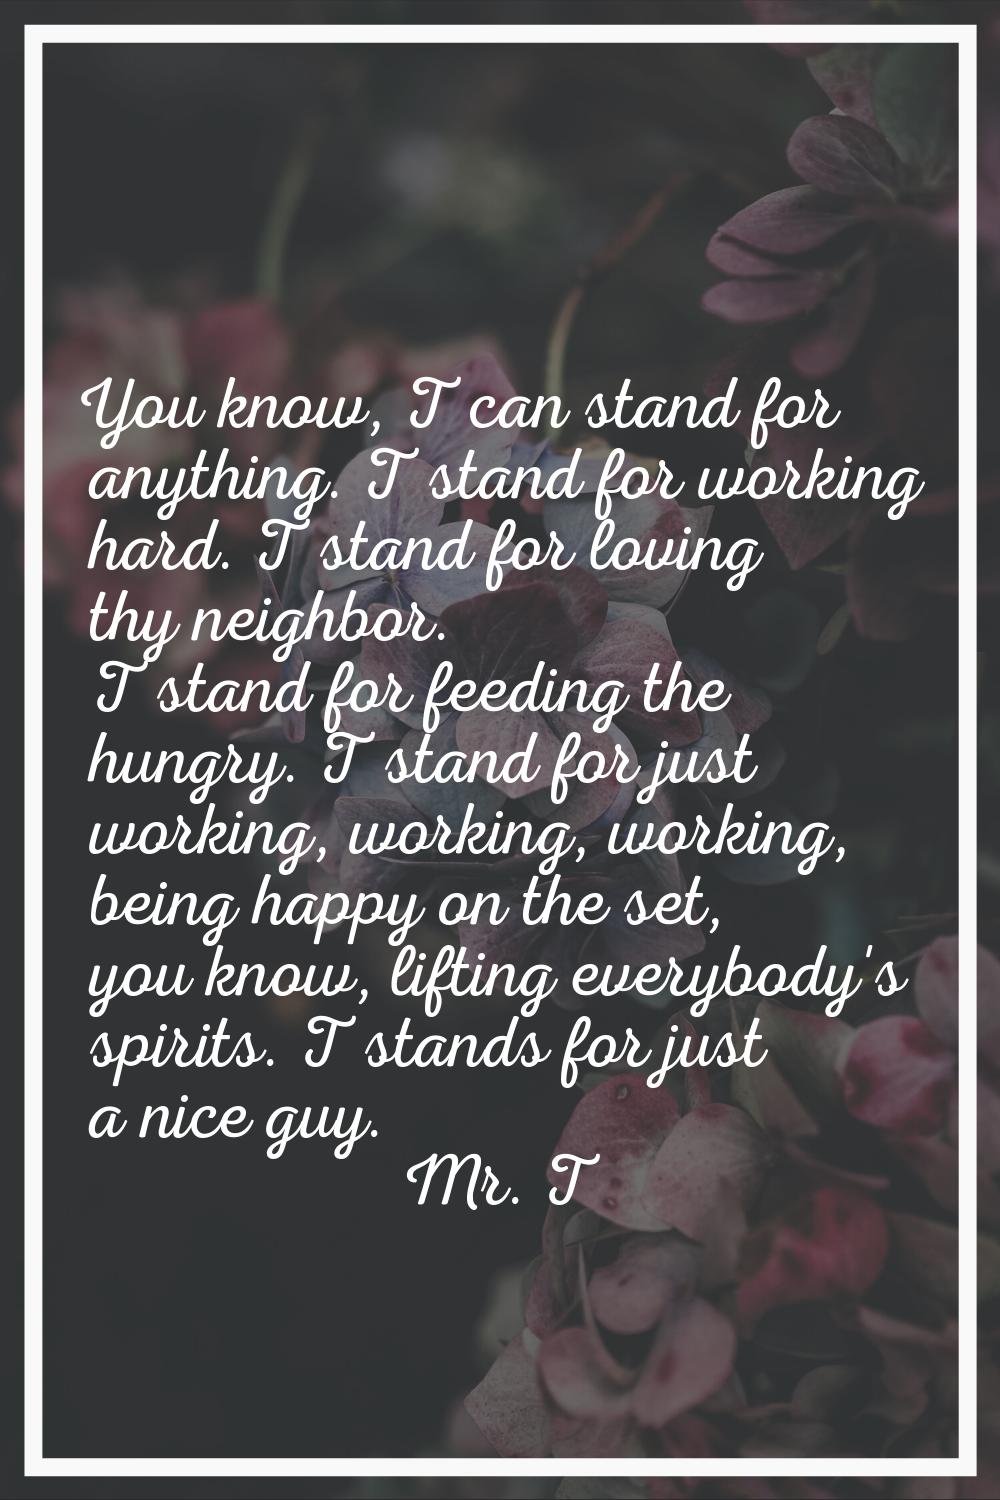 You know, T can stand for anything. T stand for working hard. T stand for loving thy neighbor. T st